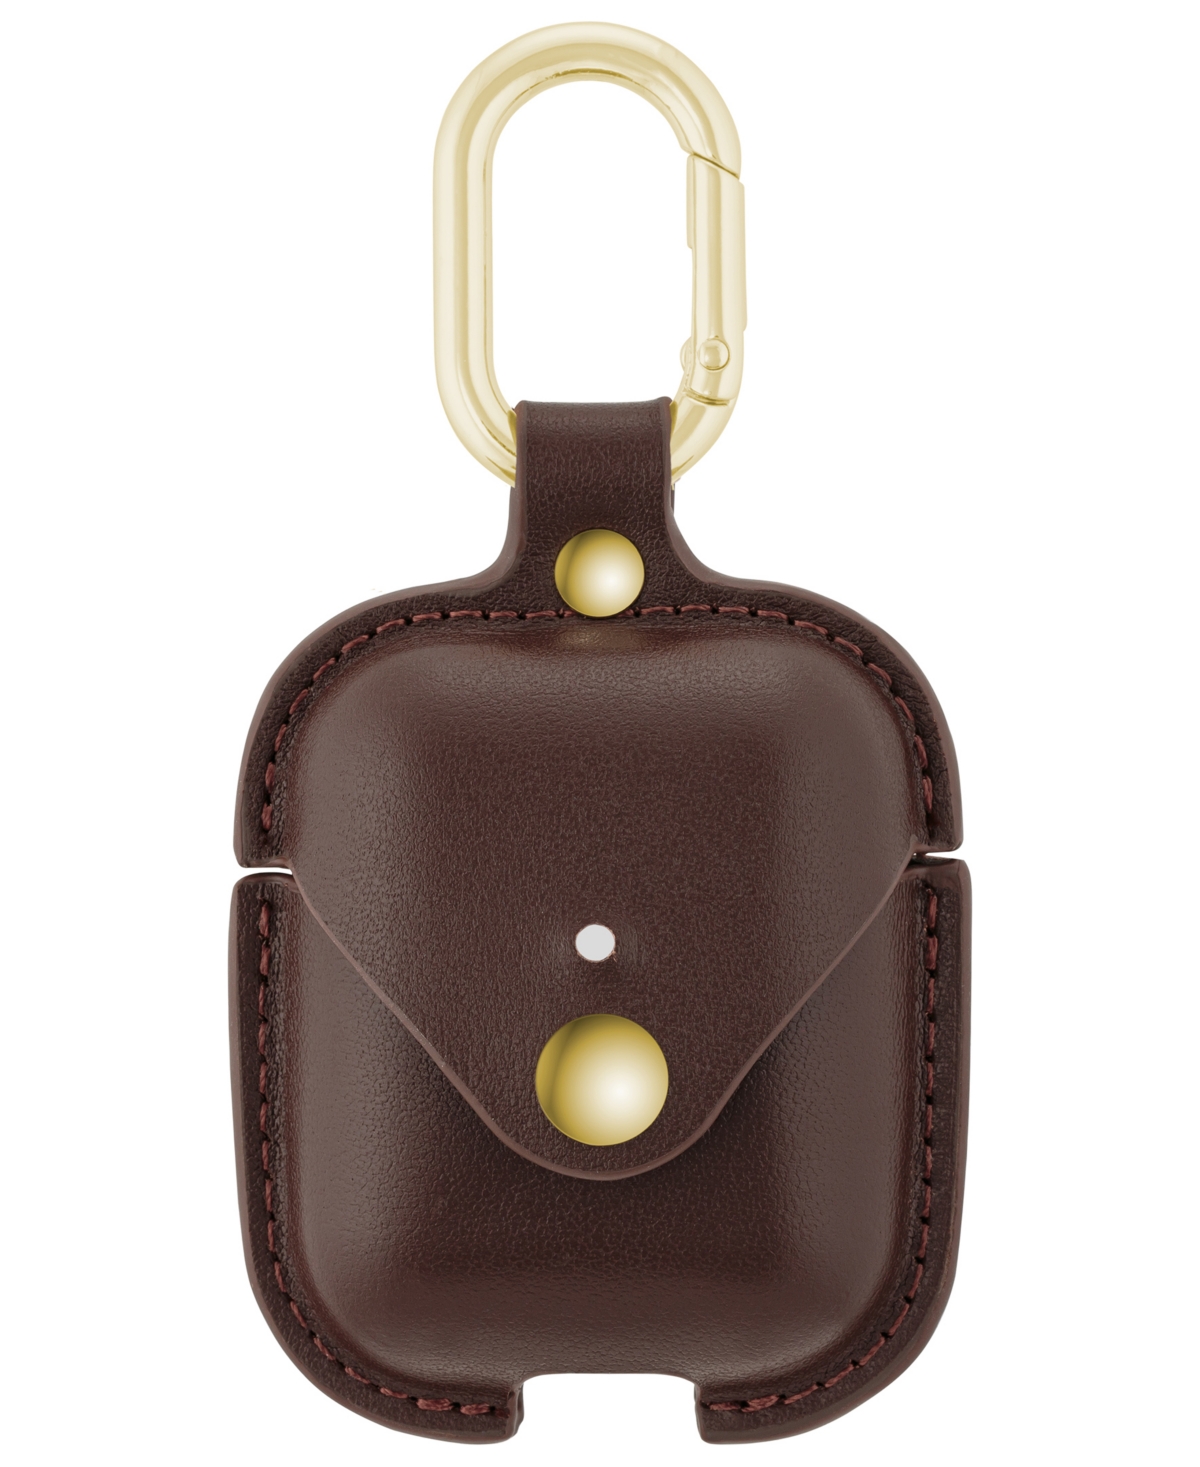 Brown Leather Apple AirPods Case with Gold-Tone Snap Closure and Carabiner Clip - Brown, Gold-Tone